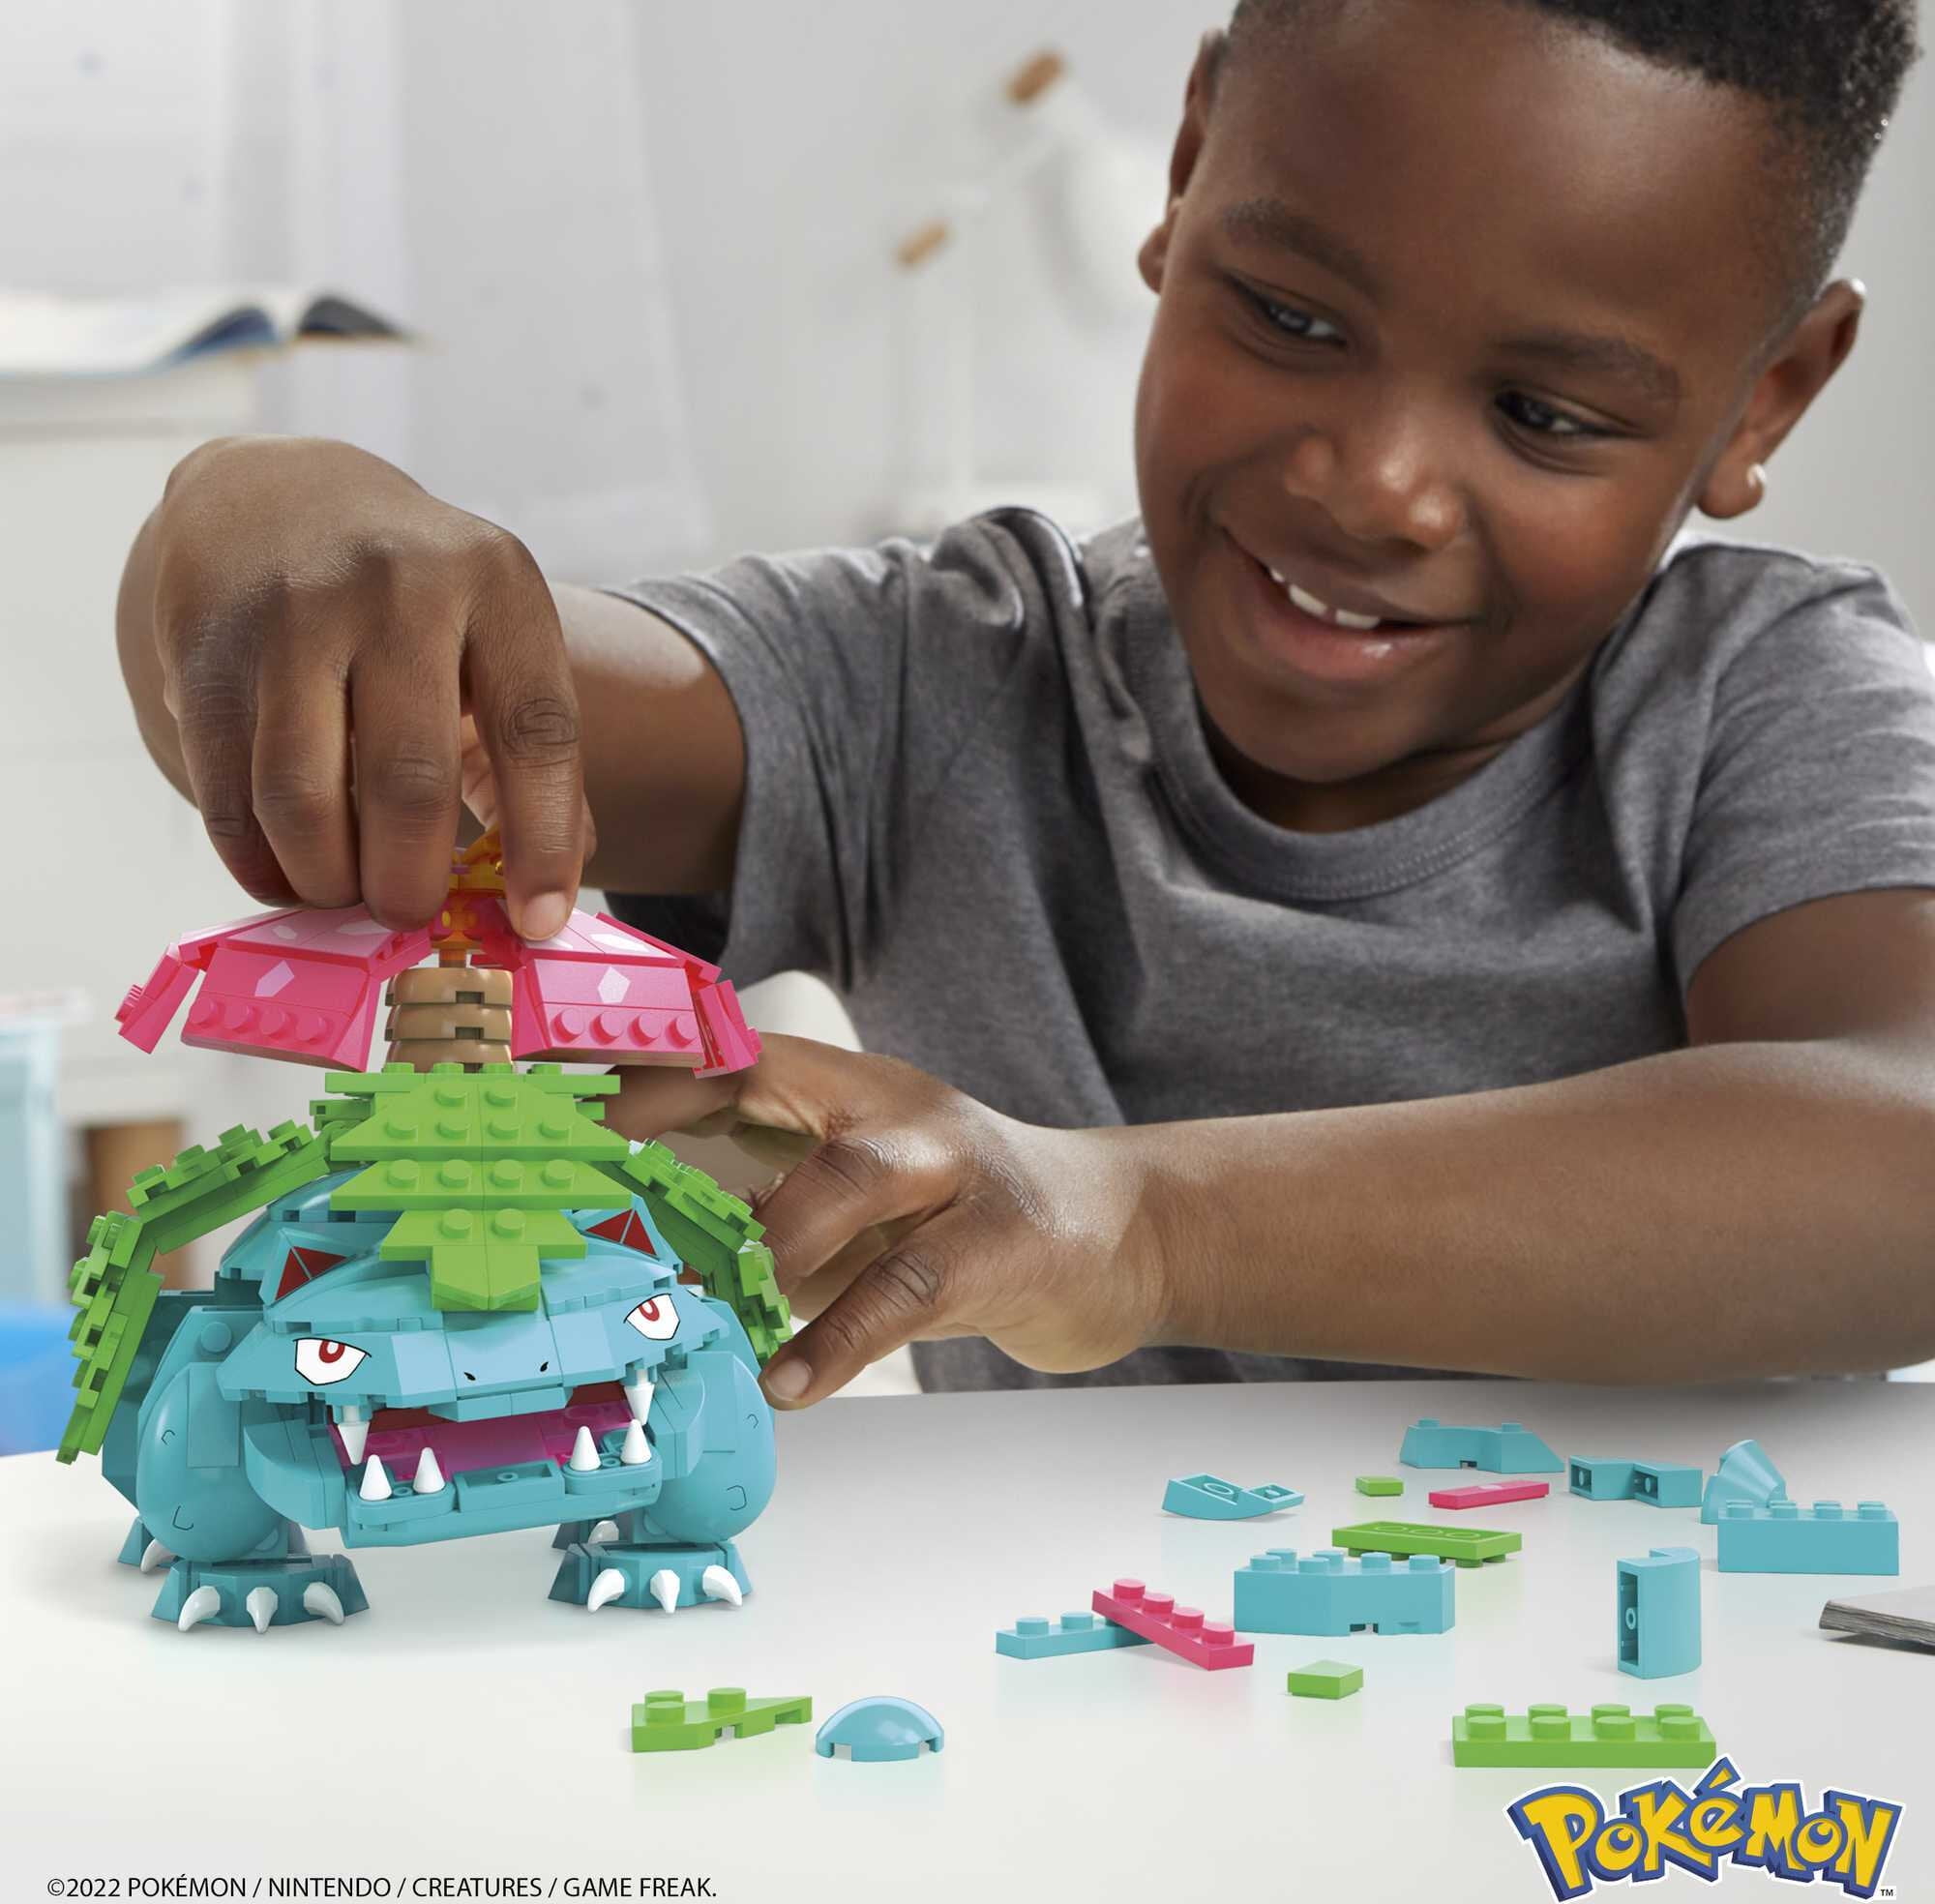 MEGA Pokémon Action Figure Building Toys, Bulbasaur With 175 Pieces, 1  Poseable Character, 4 Inches Tall, Gift Ideas For Kids